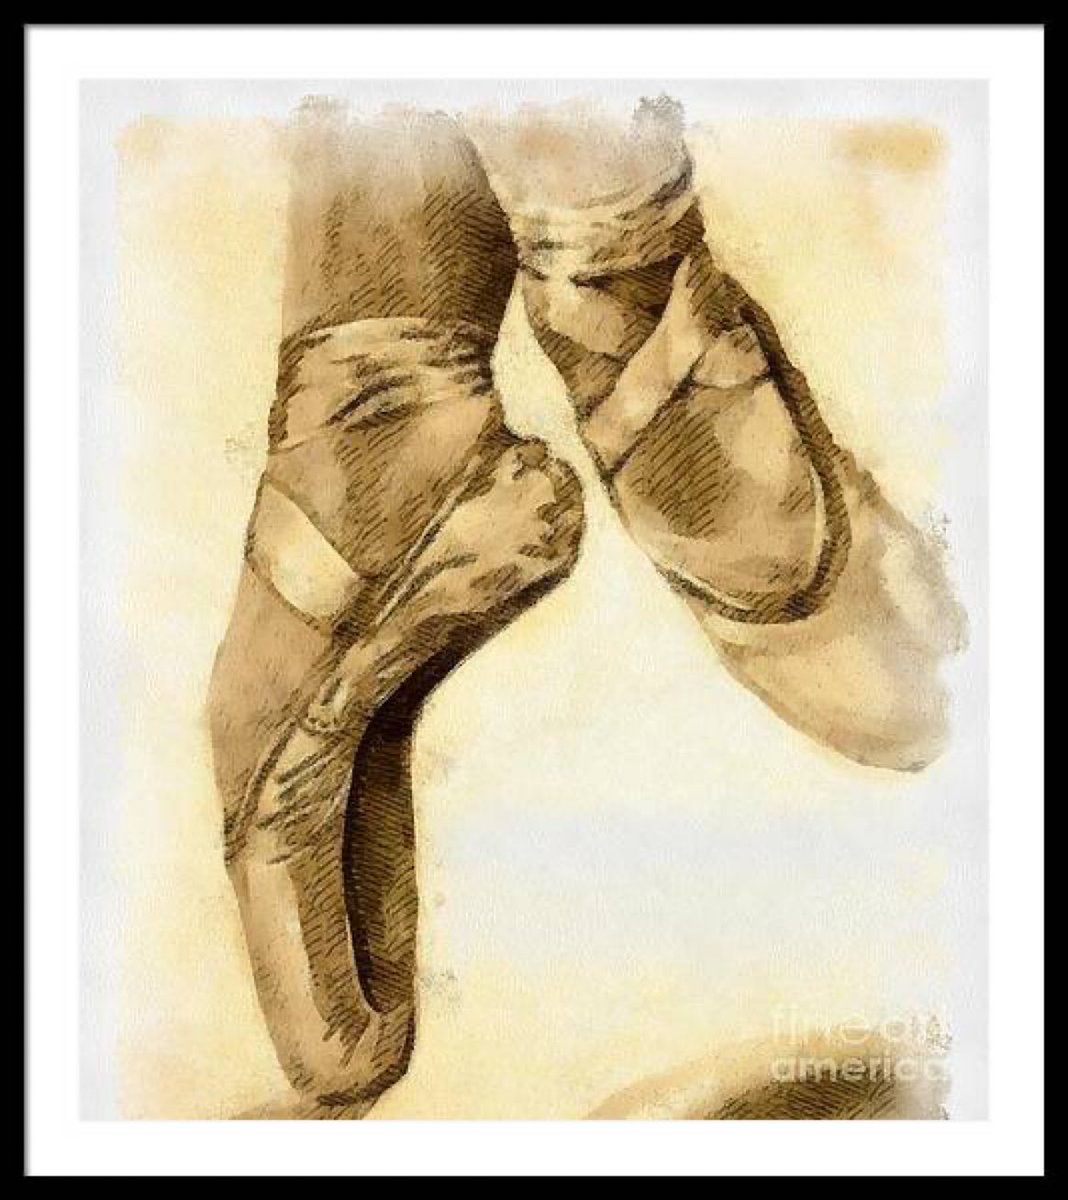 #OnePicPoetry (112)

Voice of the
voiceless,
pen of the
dispassionate

the dance
at our feet
the semblance
our spirits

we are always
on tiptoes
rising
above and beyond

a solemn rise,
our dance
an elated reflection
of a higher self

Art: Yanni Theodorou